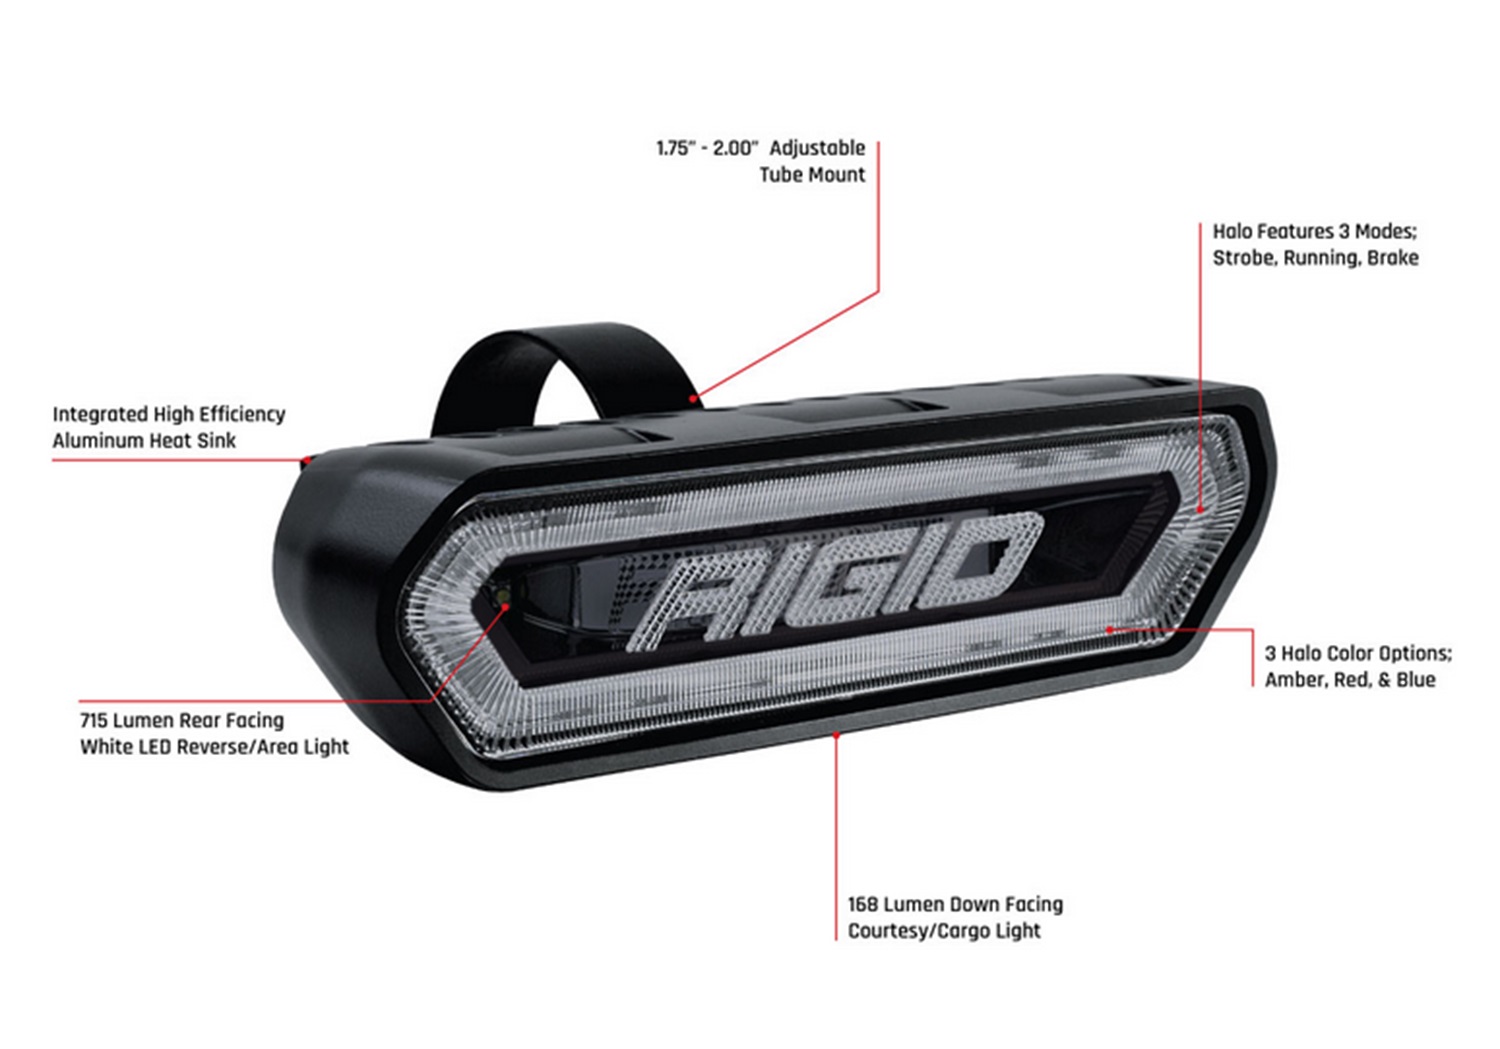 Picture of RIGID Industries 90122 Rigid Chase, Rear Facing 5 Mode Led Light, Amber Halo, Black Housing